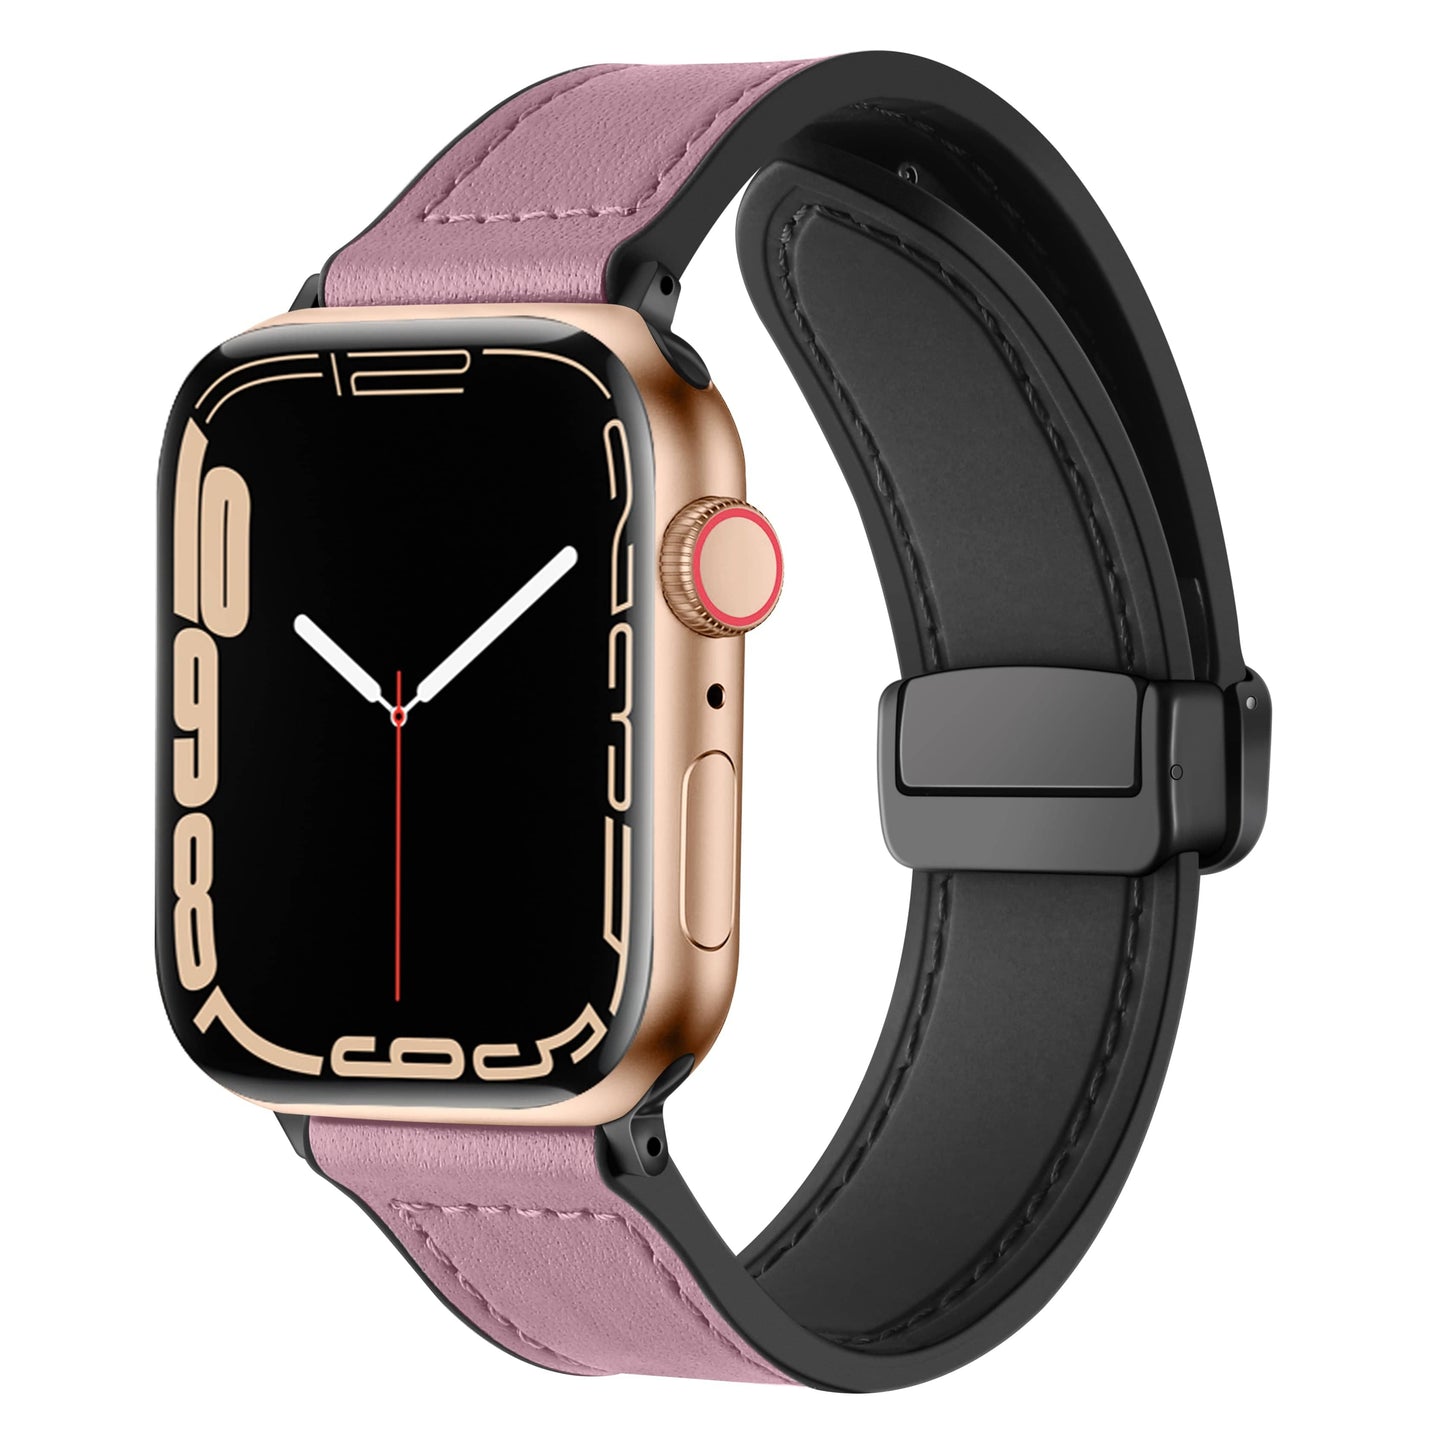 Retro Leather Band For Apple Watch with Steel Magnetic Deployant Strap